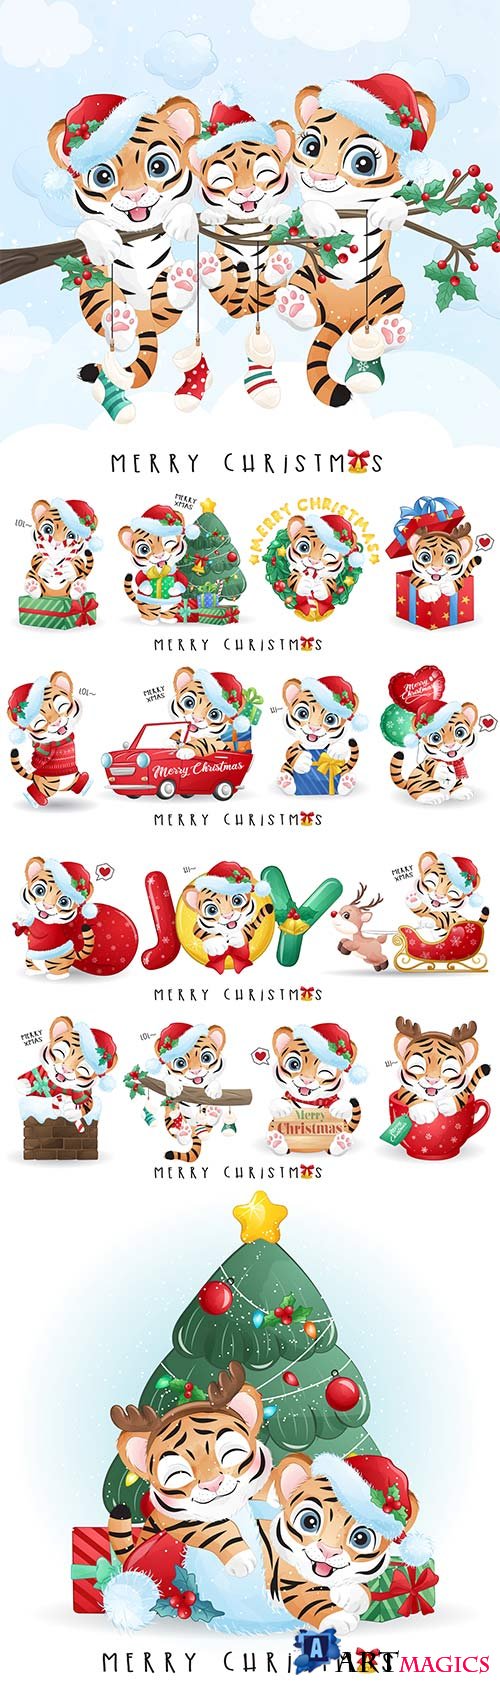 Cute doodle tiger for merry christmas illustration set premium vector